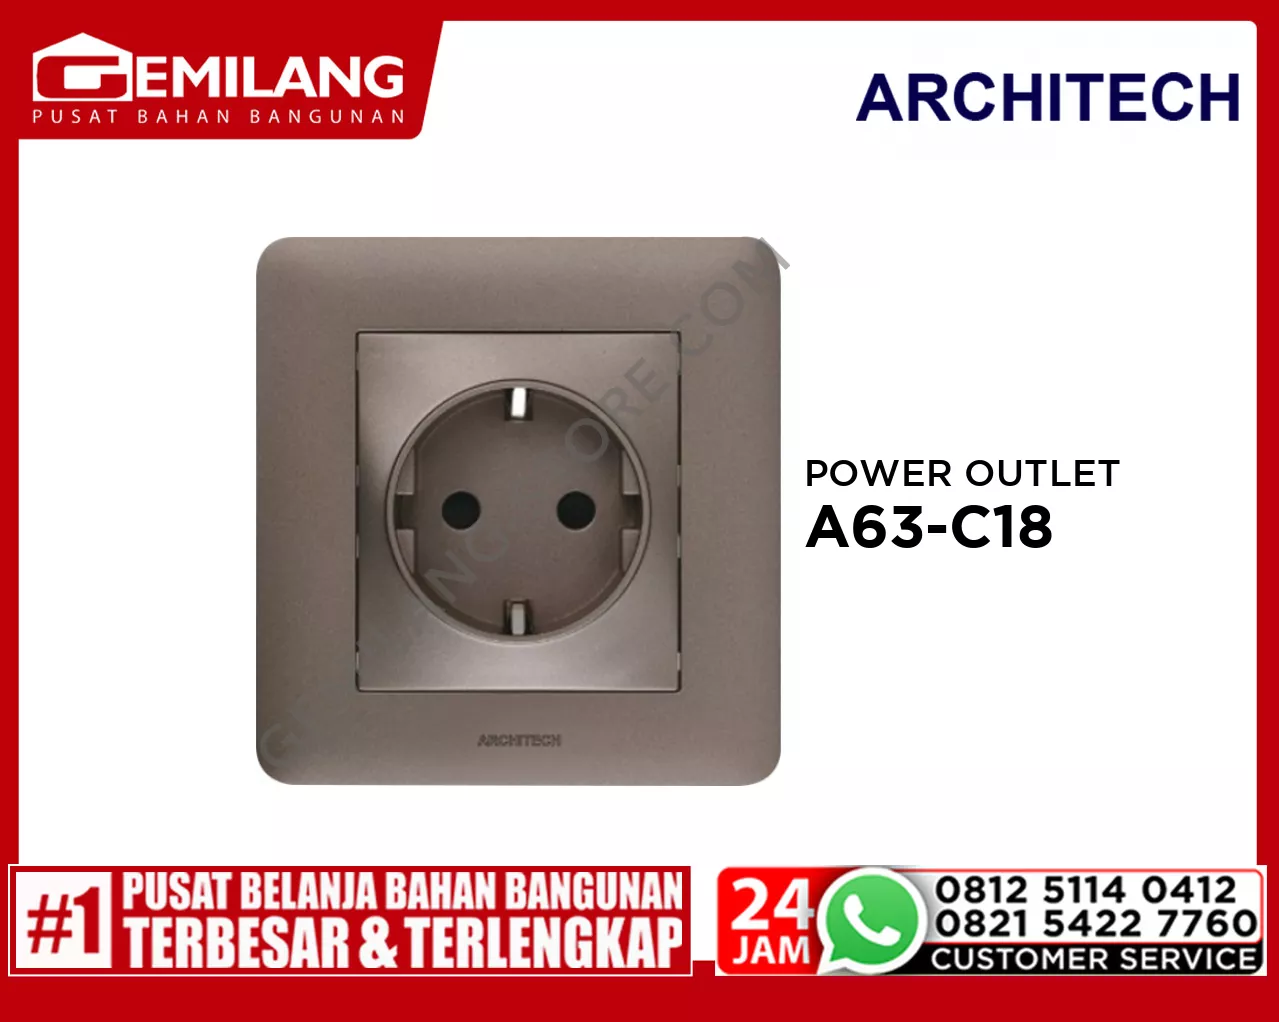 ARCHITECH POWER OUTLET INFINITY A63-C18 16A BW